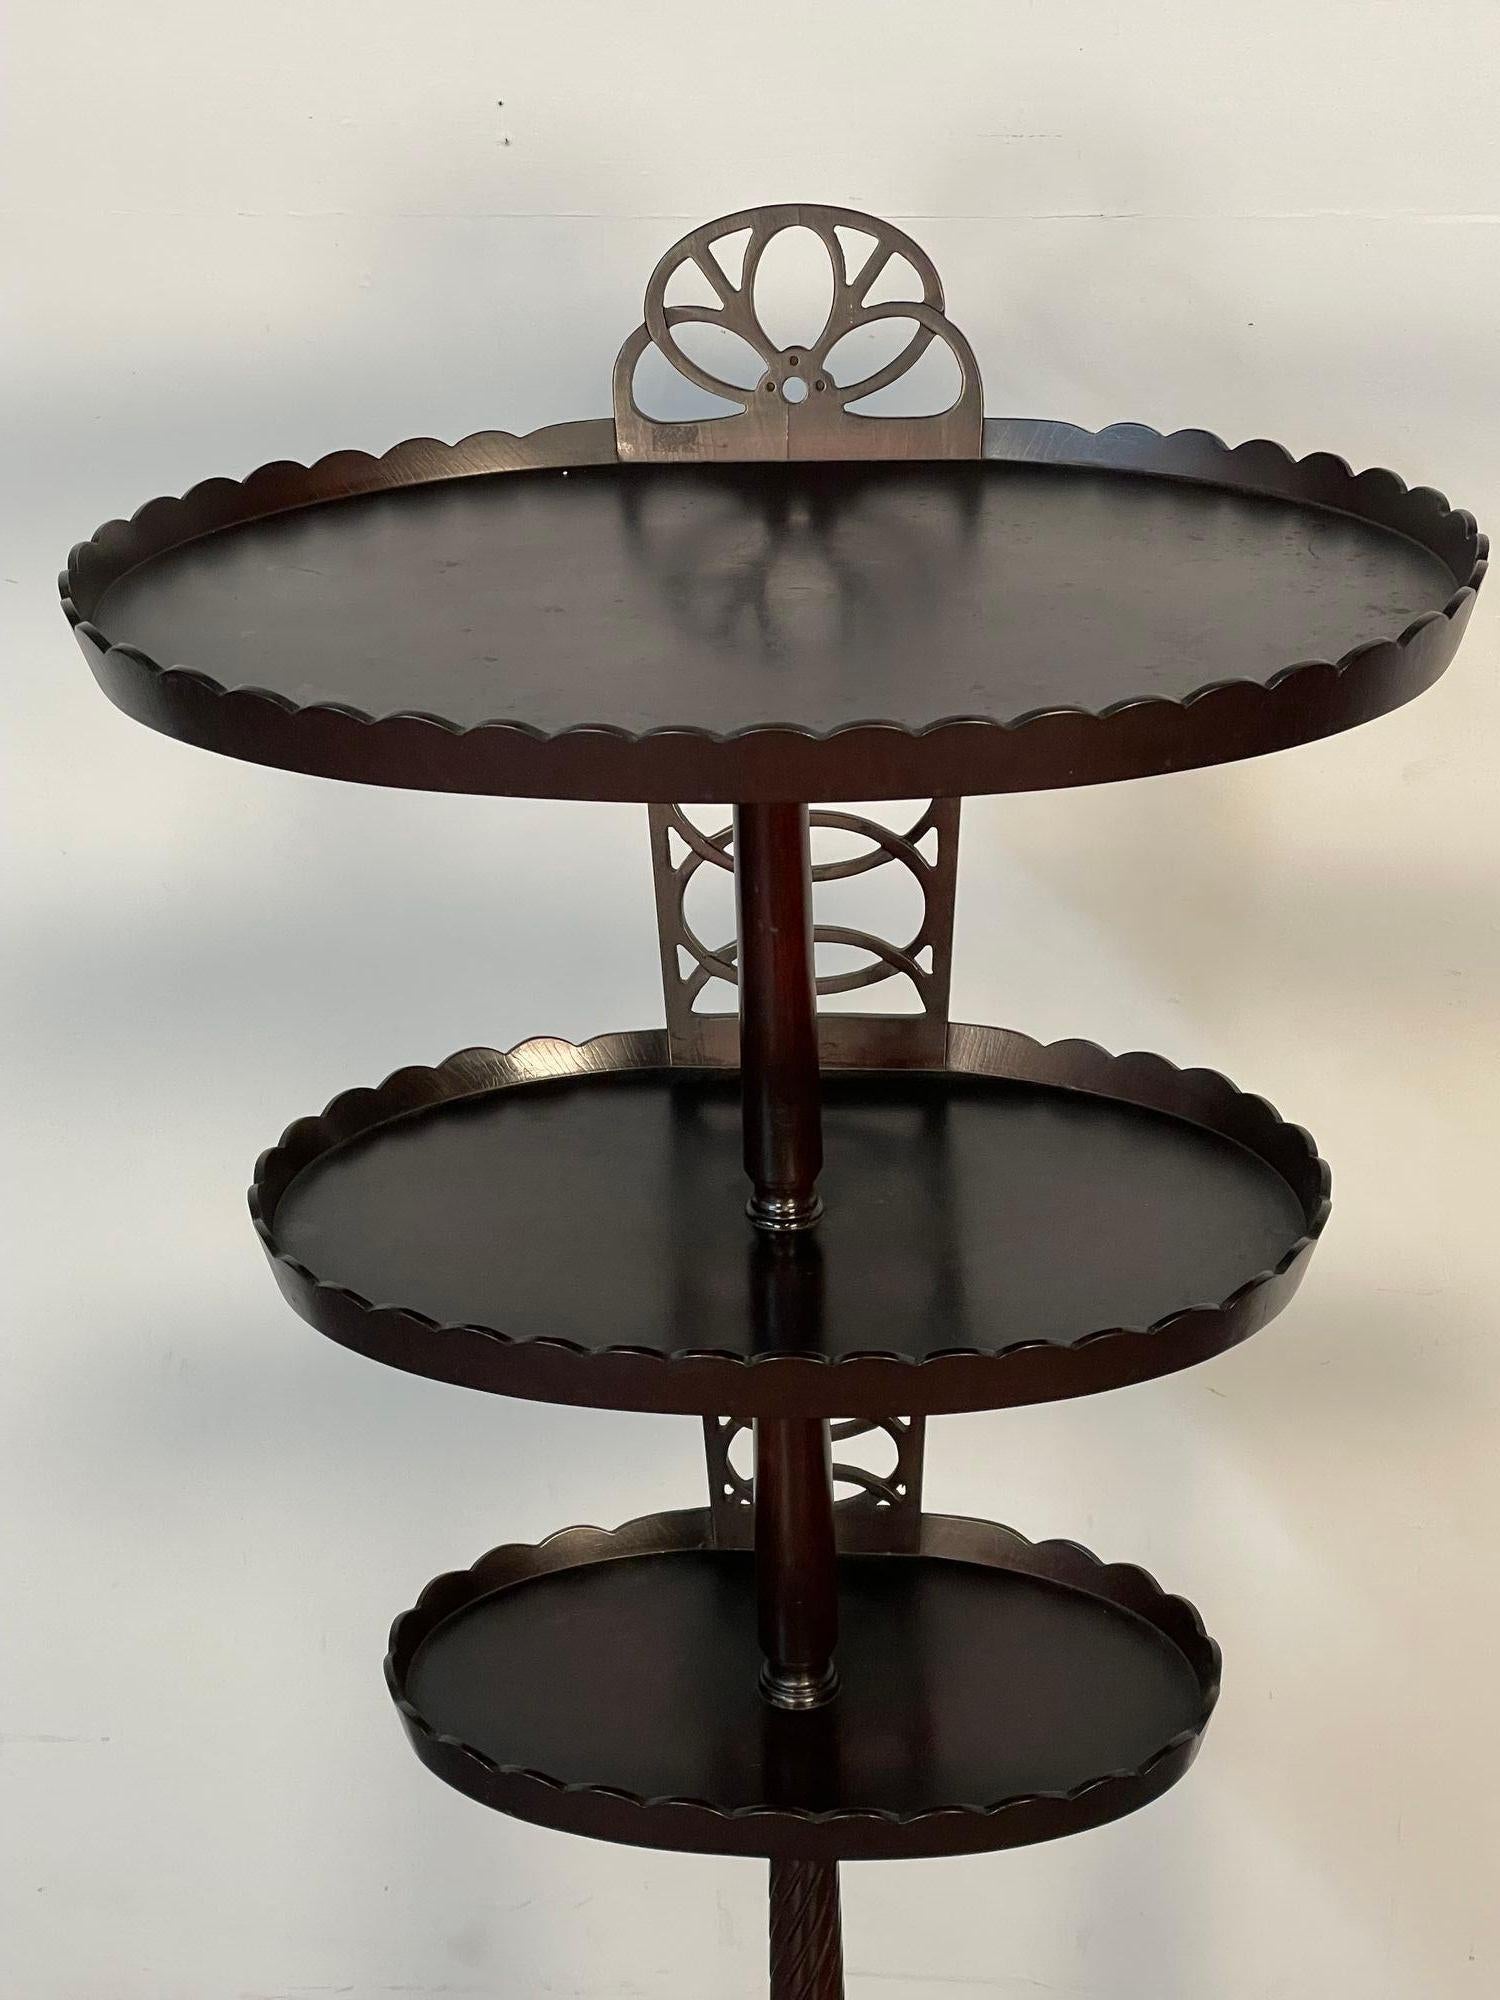 20th Century Georgian Style Mahogany Tri-Shelf Desert Stand / Dining Room Accent Décor For Sale